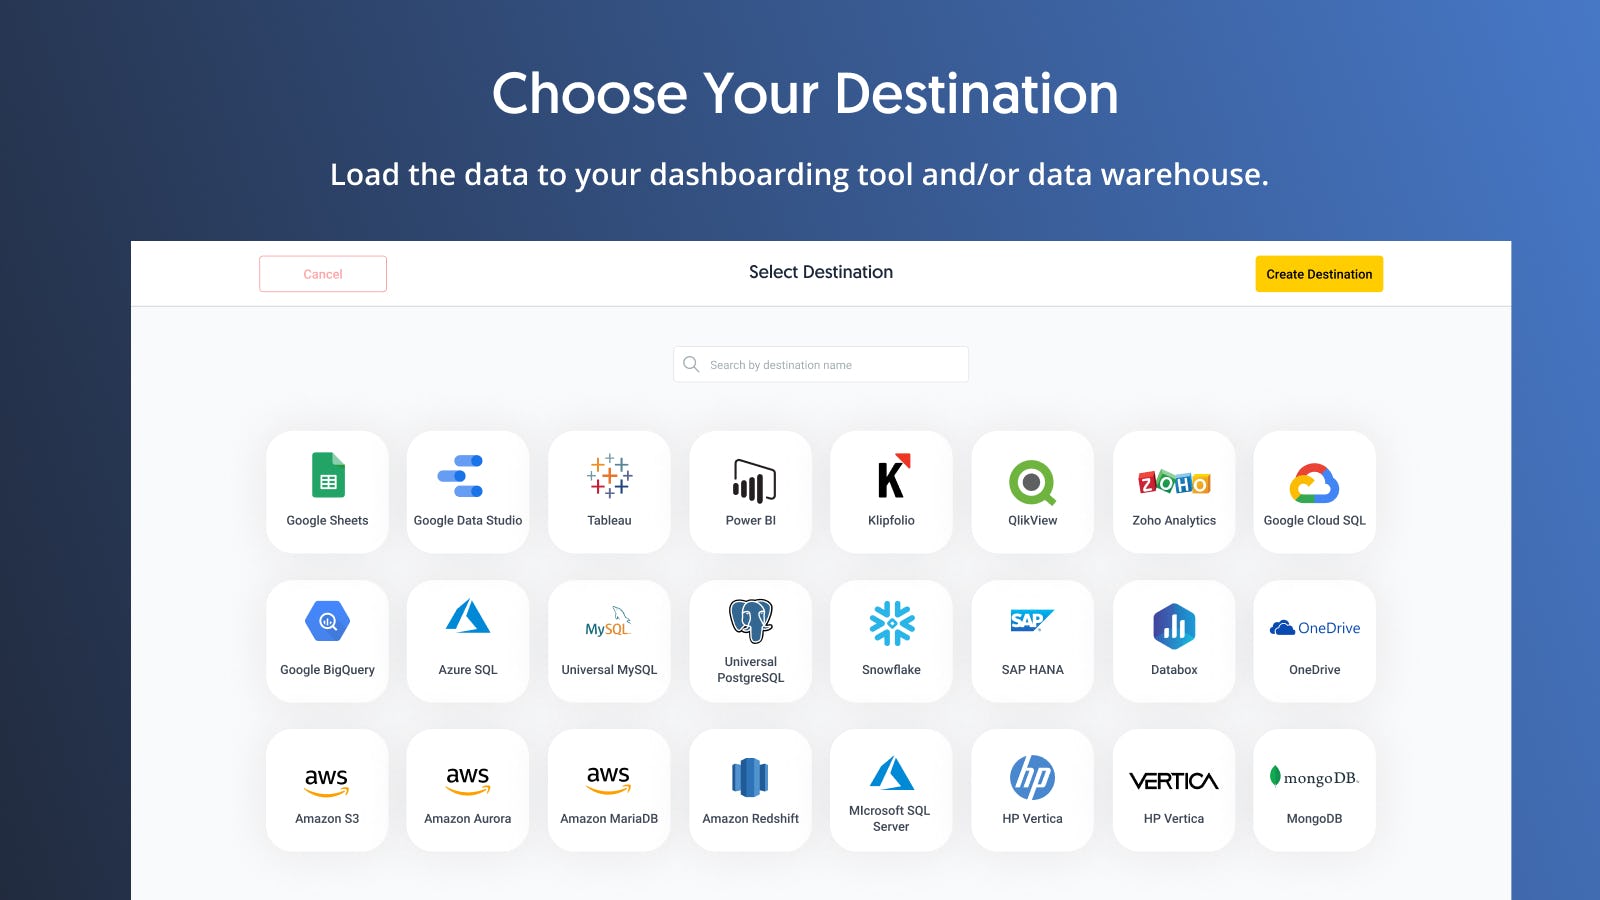 Dataddo Software - Choose your any and all of your destinations, whether that's a dashboarding tool or data warehouse.